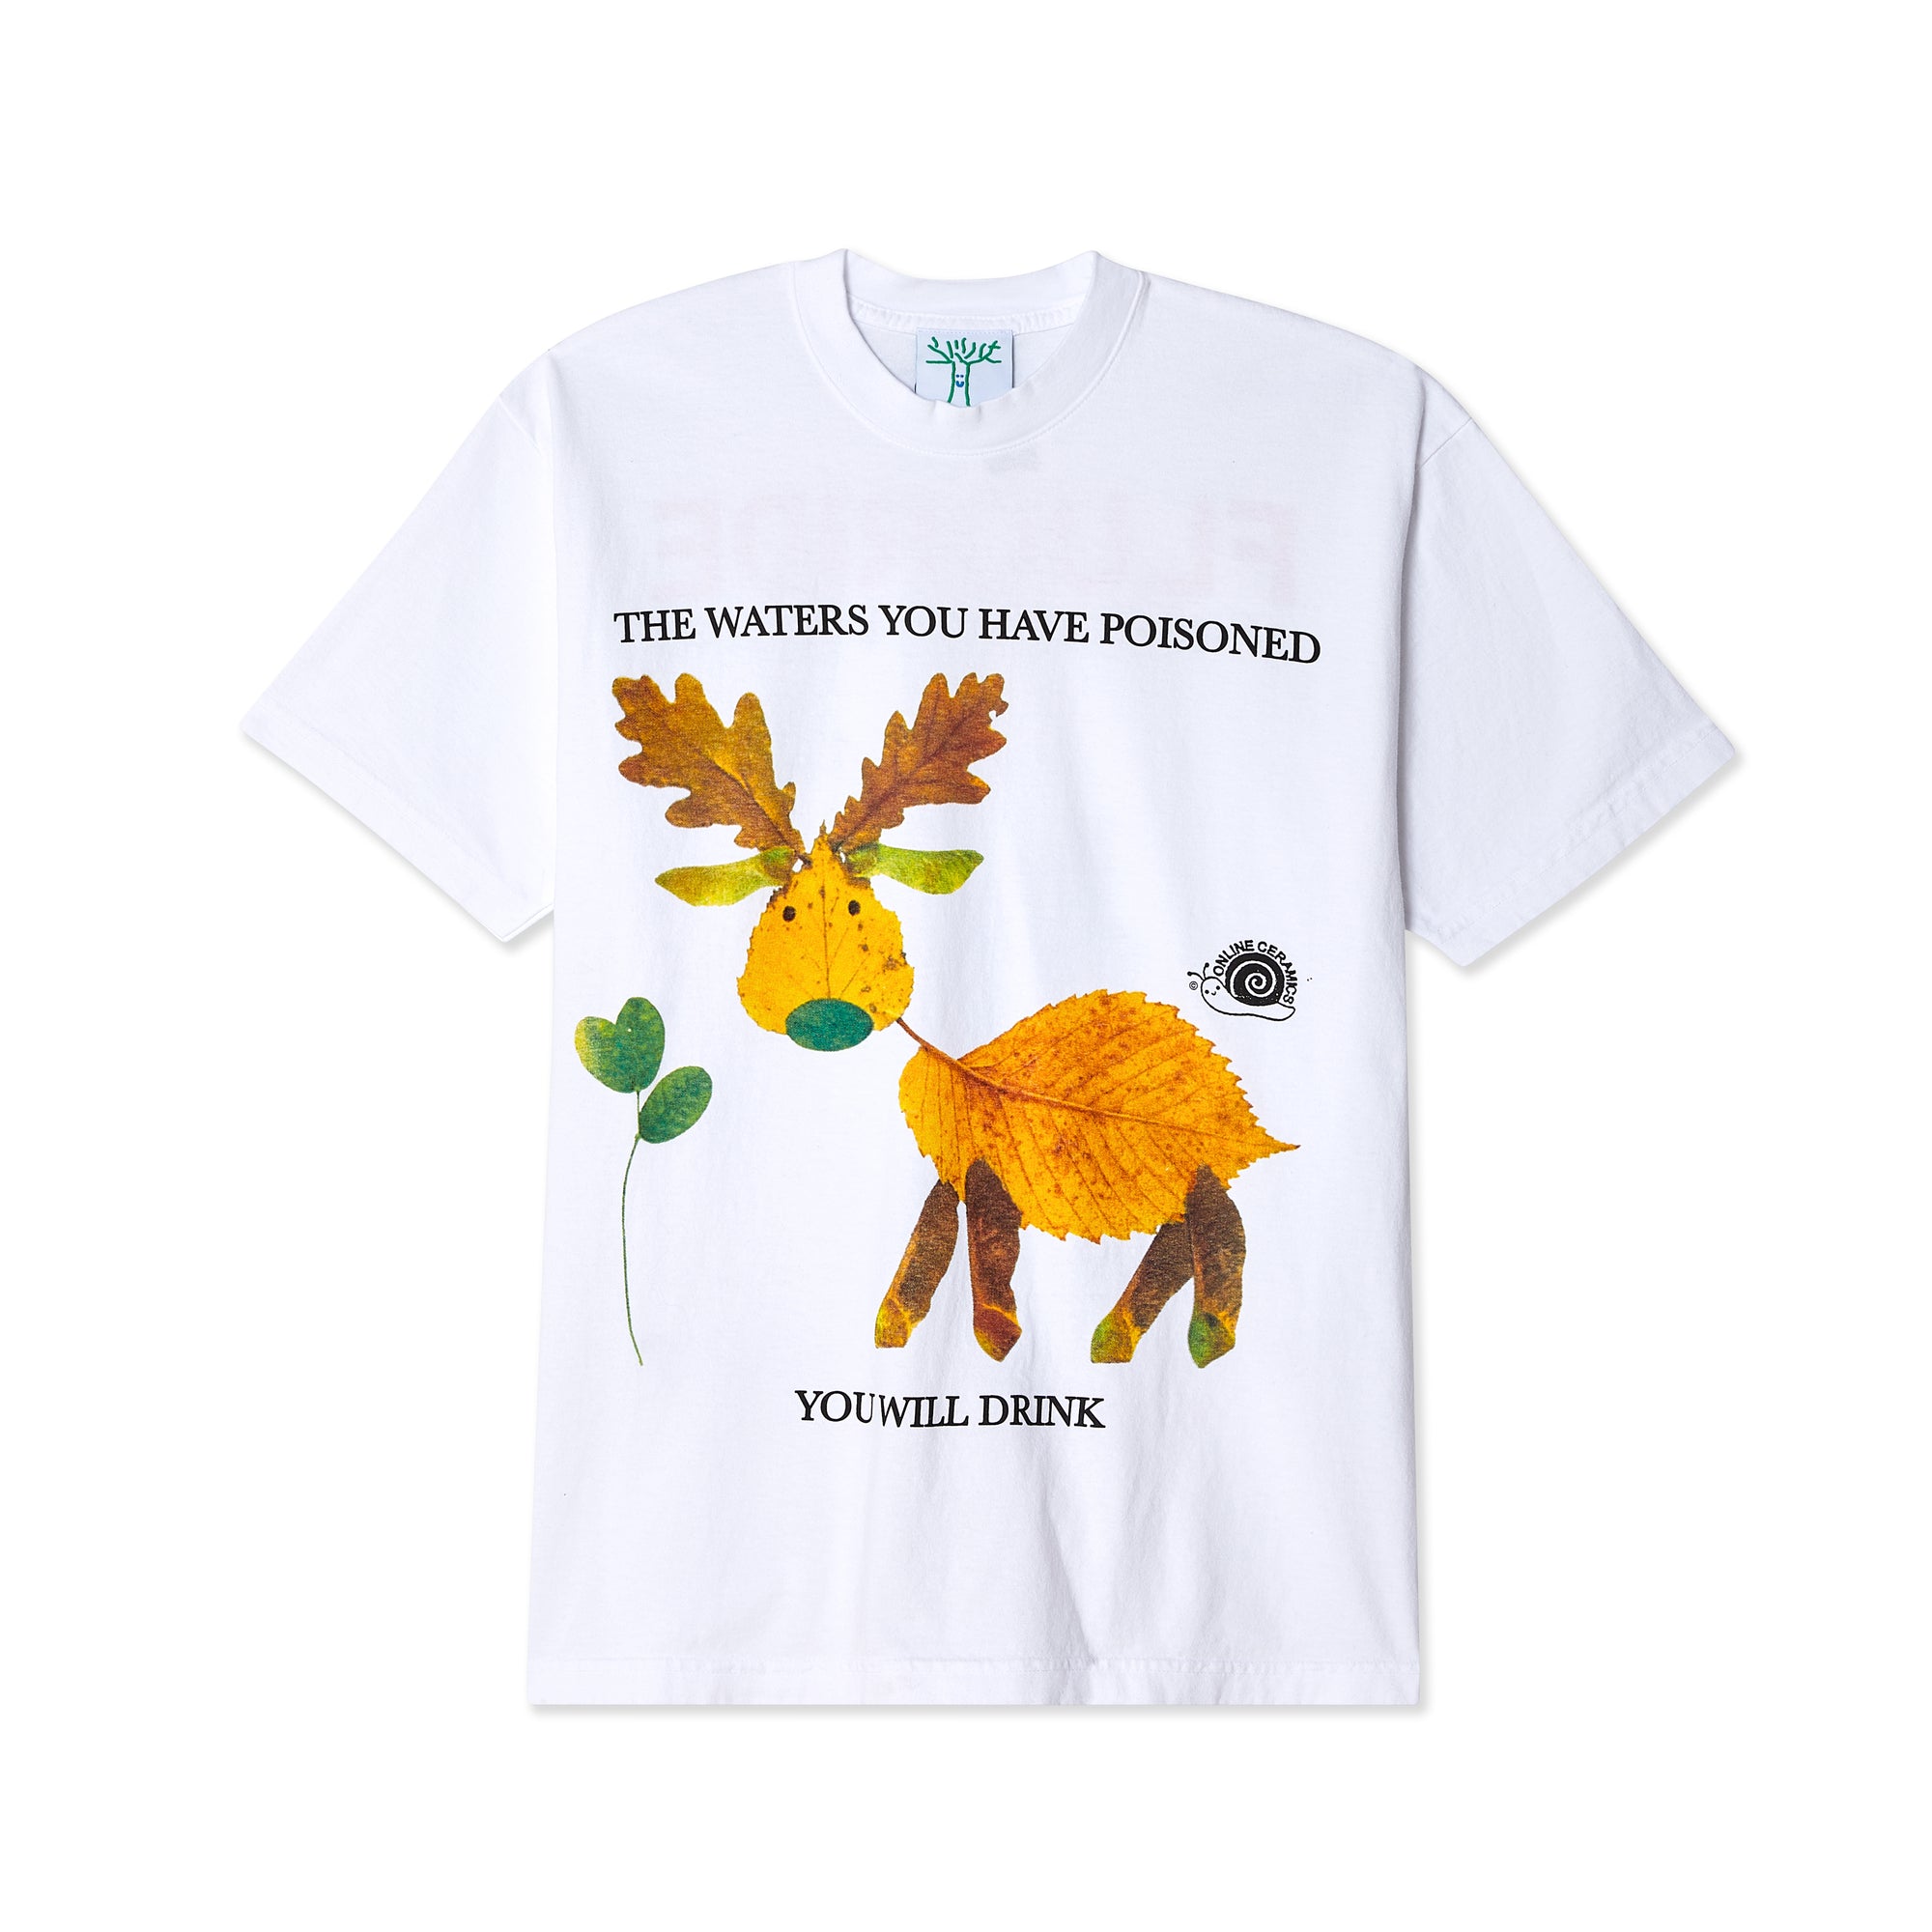 Online Ceramics - The Waters You Have Poisoned T-Shirt - (White) view 1